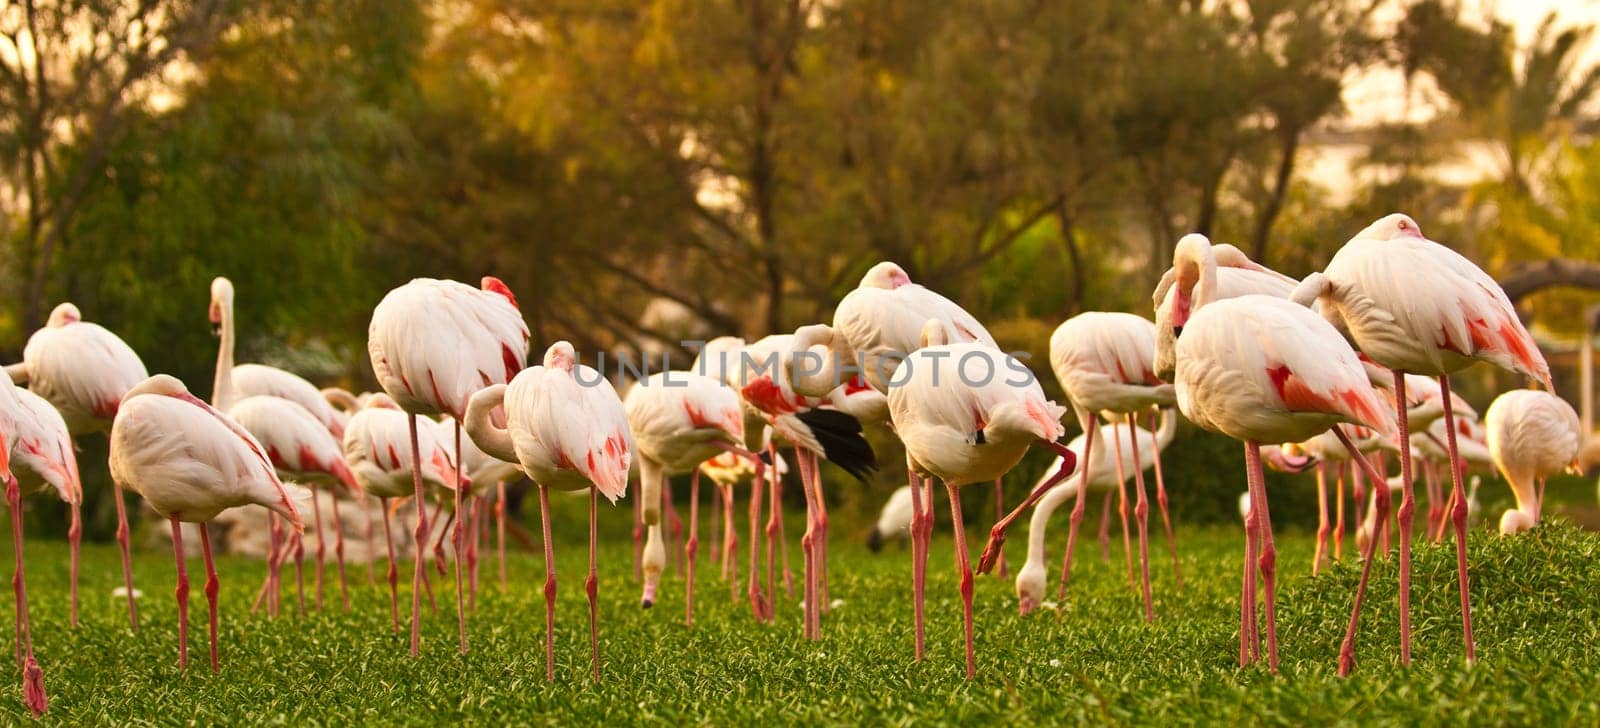 Discover the beauty of the Greater Flamingo, a majestic pink bird found in Al Areen Wildlife Park, Sakhir, Bahrain. Illuminated with a vibrant stock image.